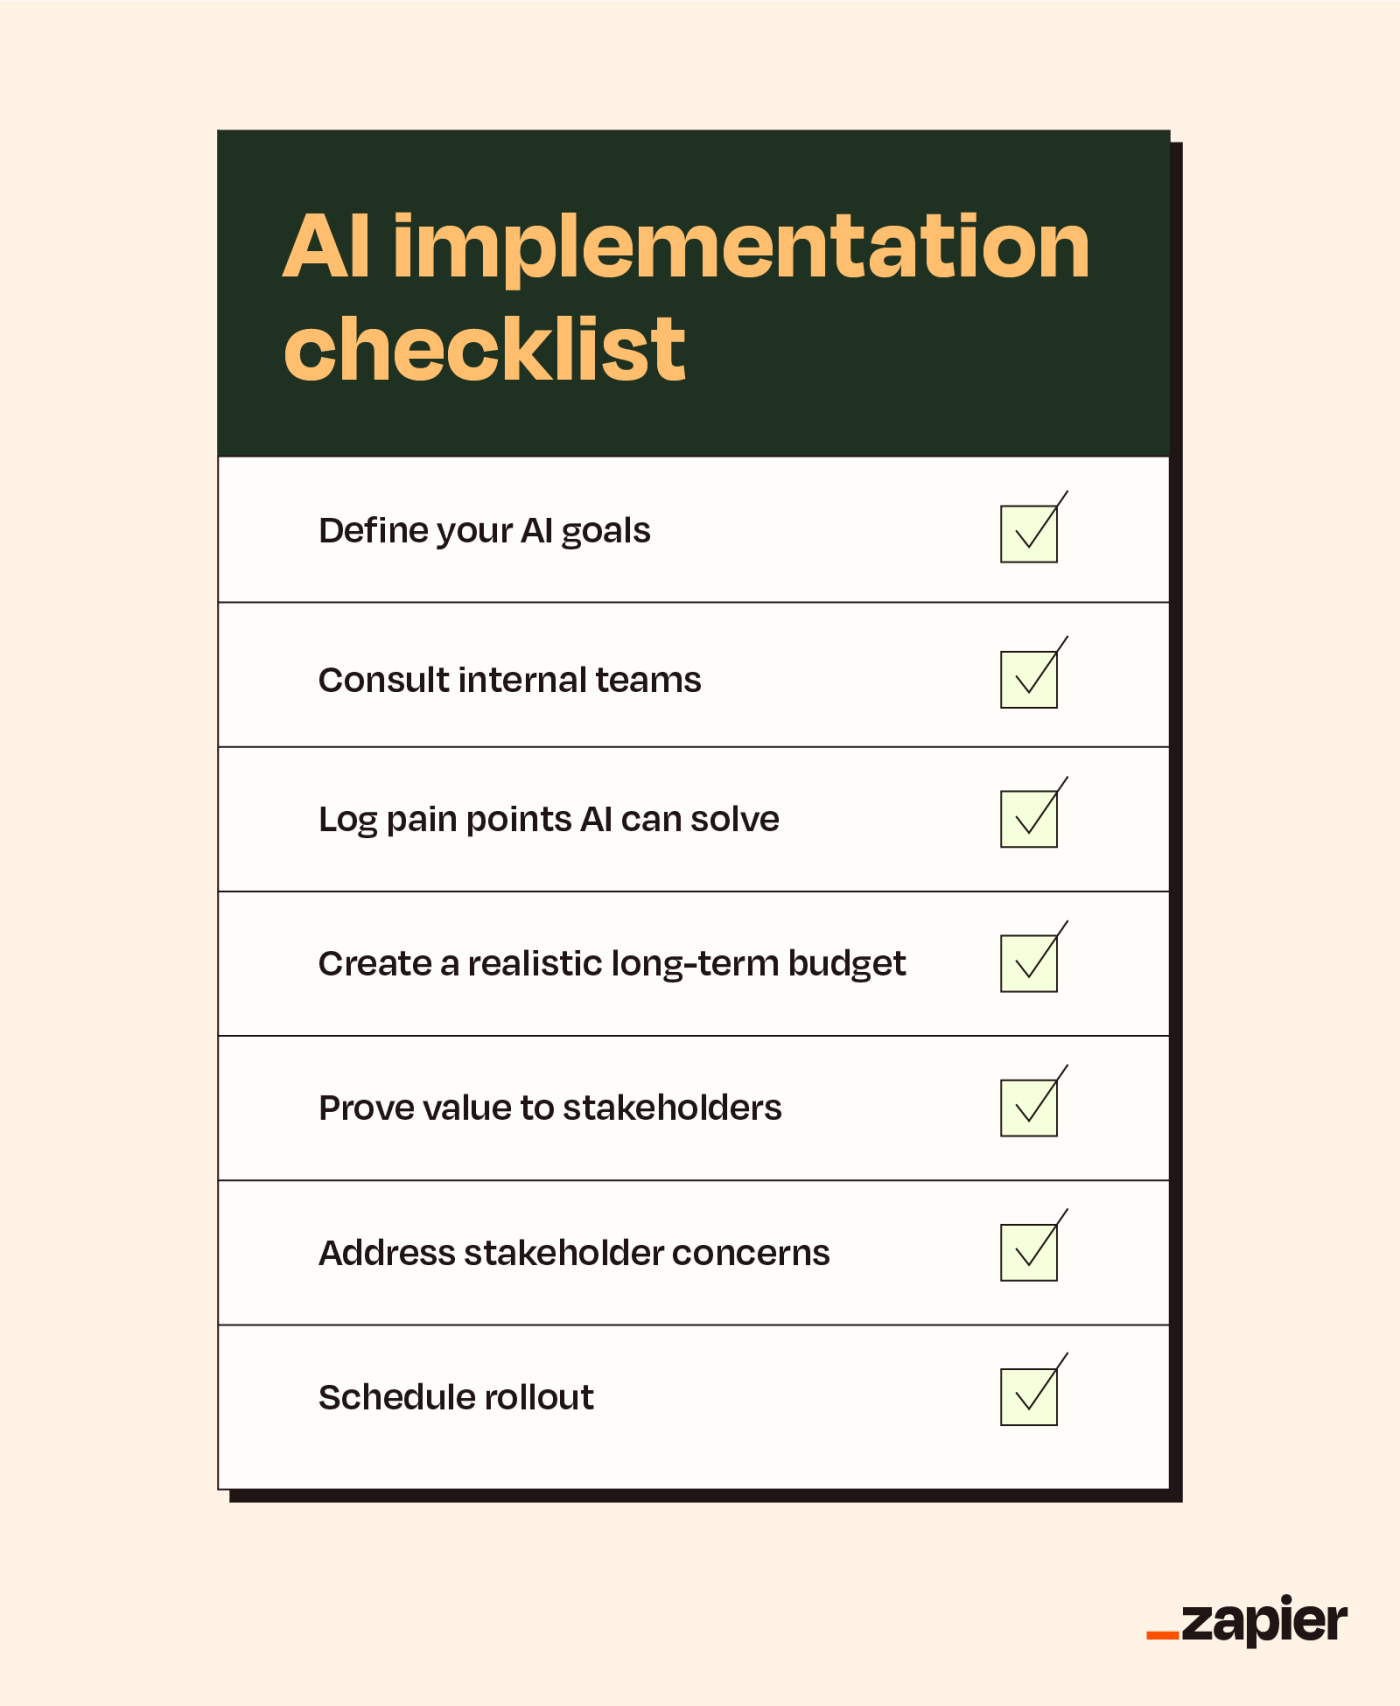 Checklist covering 7 steps to ensure that your AI is being implemented properly.